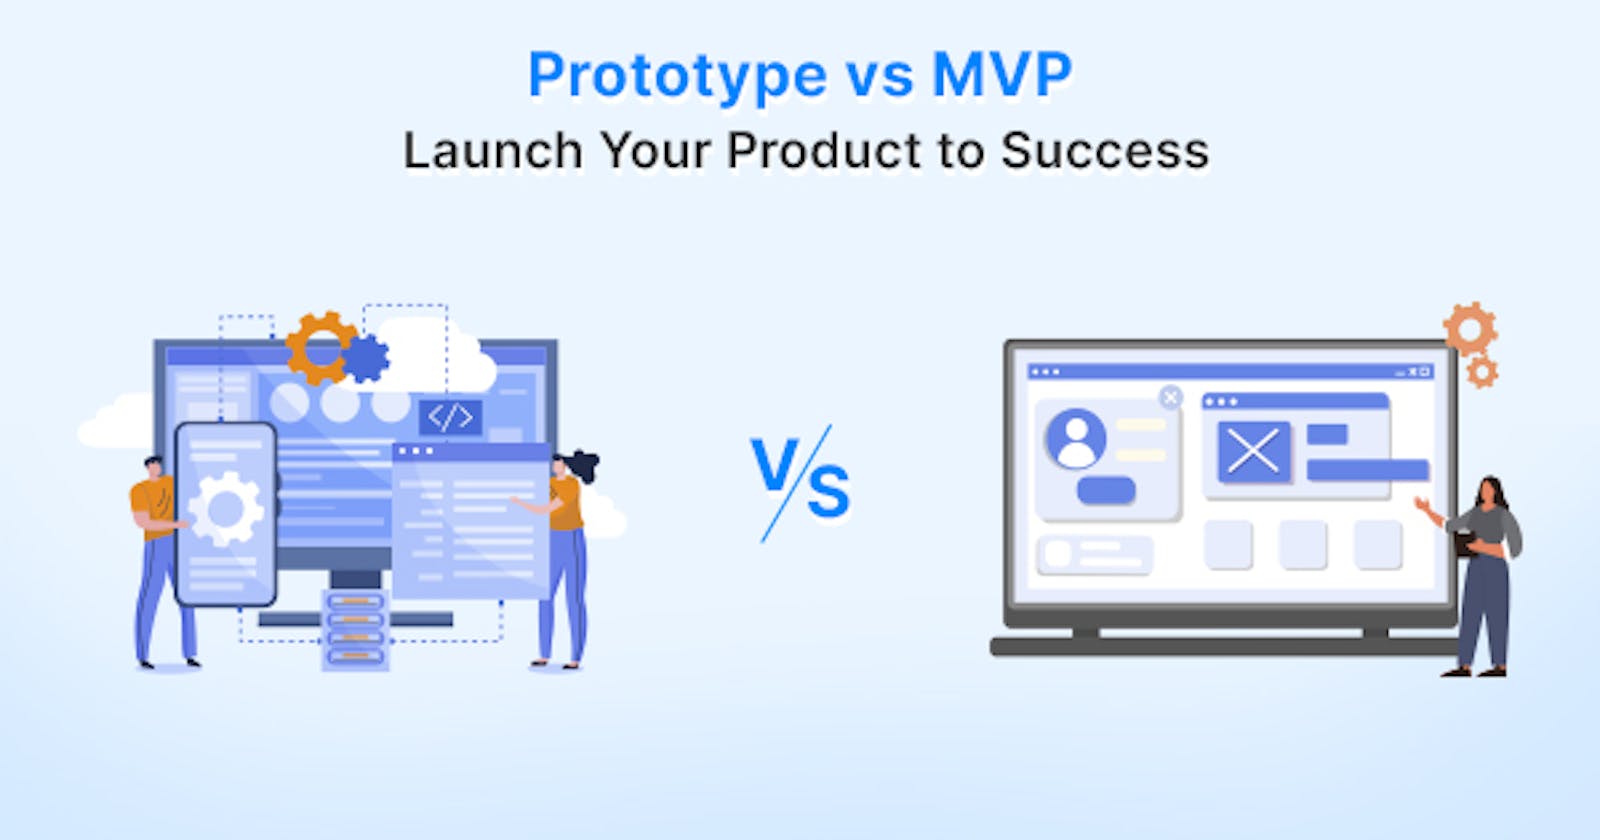 Prototype vs MVP: Launch Your Product to Success